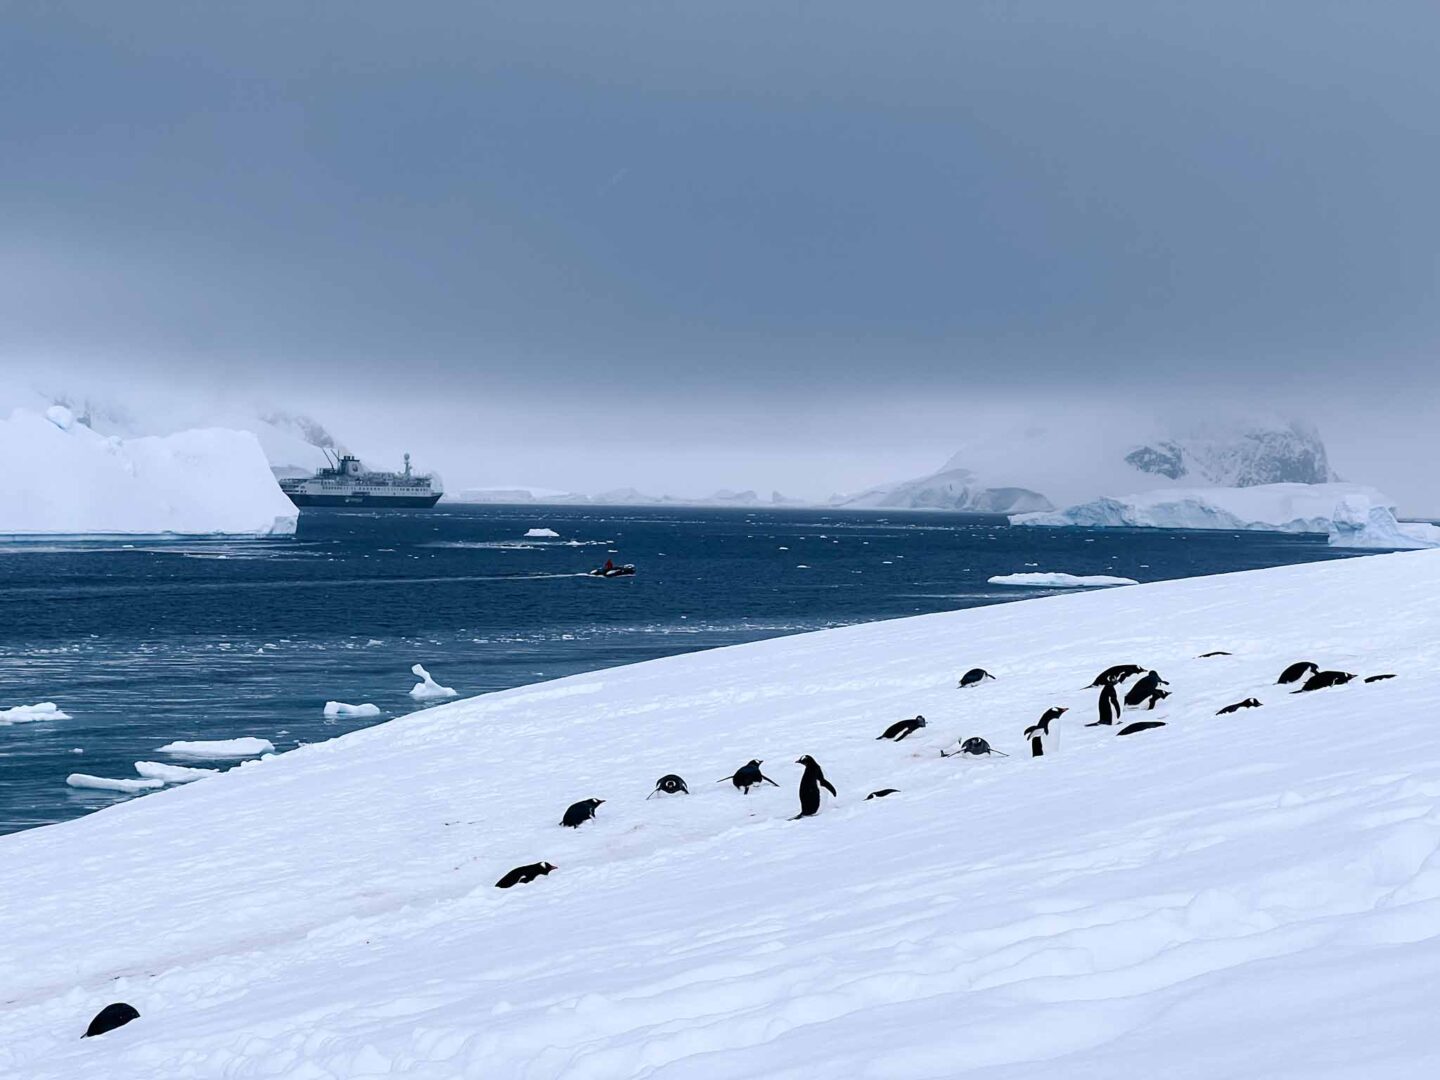 penguins on snow in Antarctica with ship in background, Can you visit Antarctica, Why do people visit Antarctica,